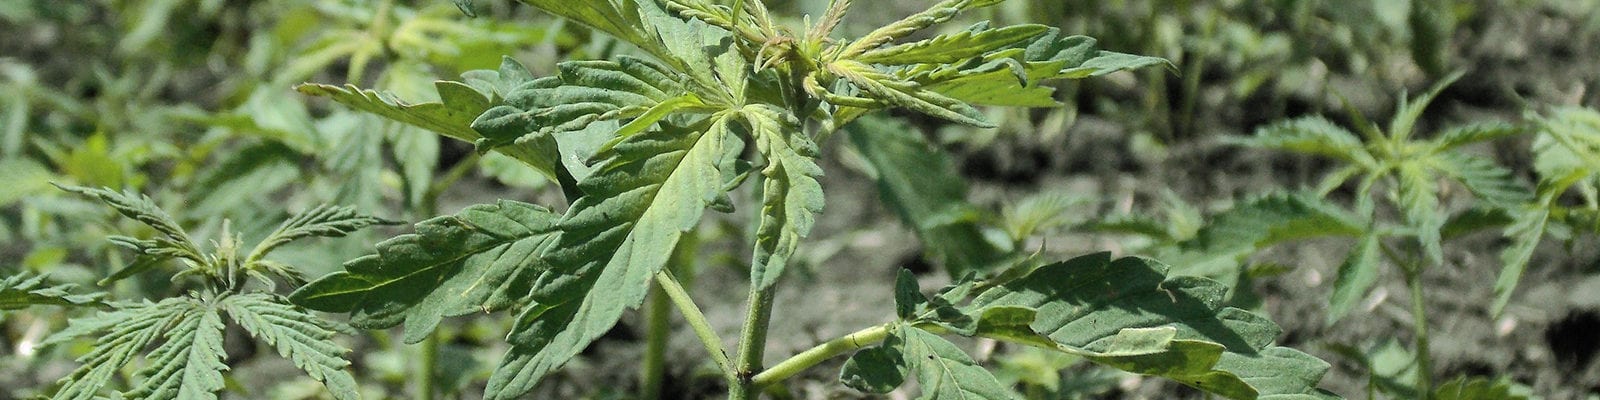 A young hemp plant growing in a dry, dirty field.